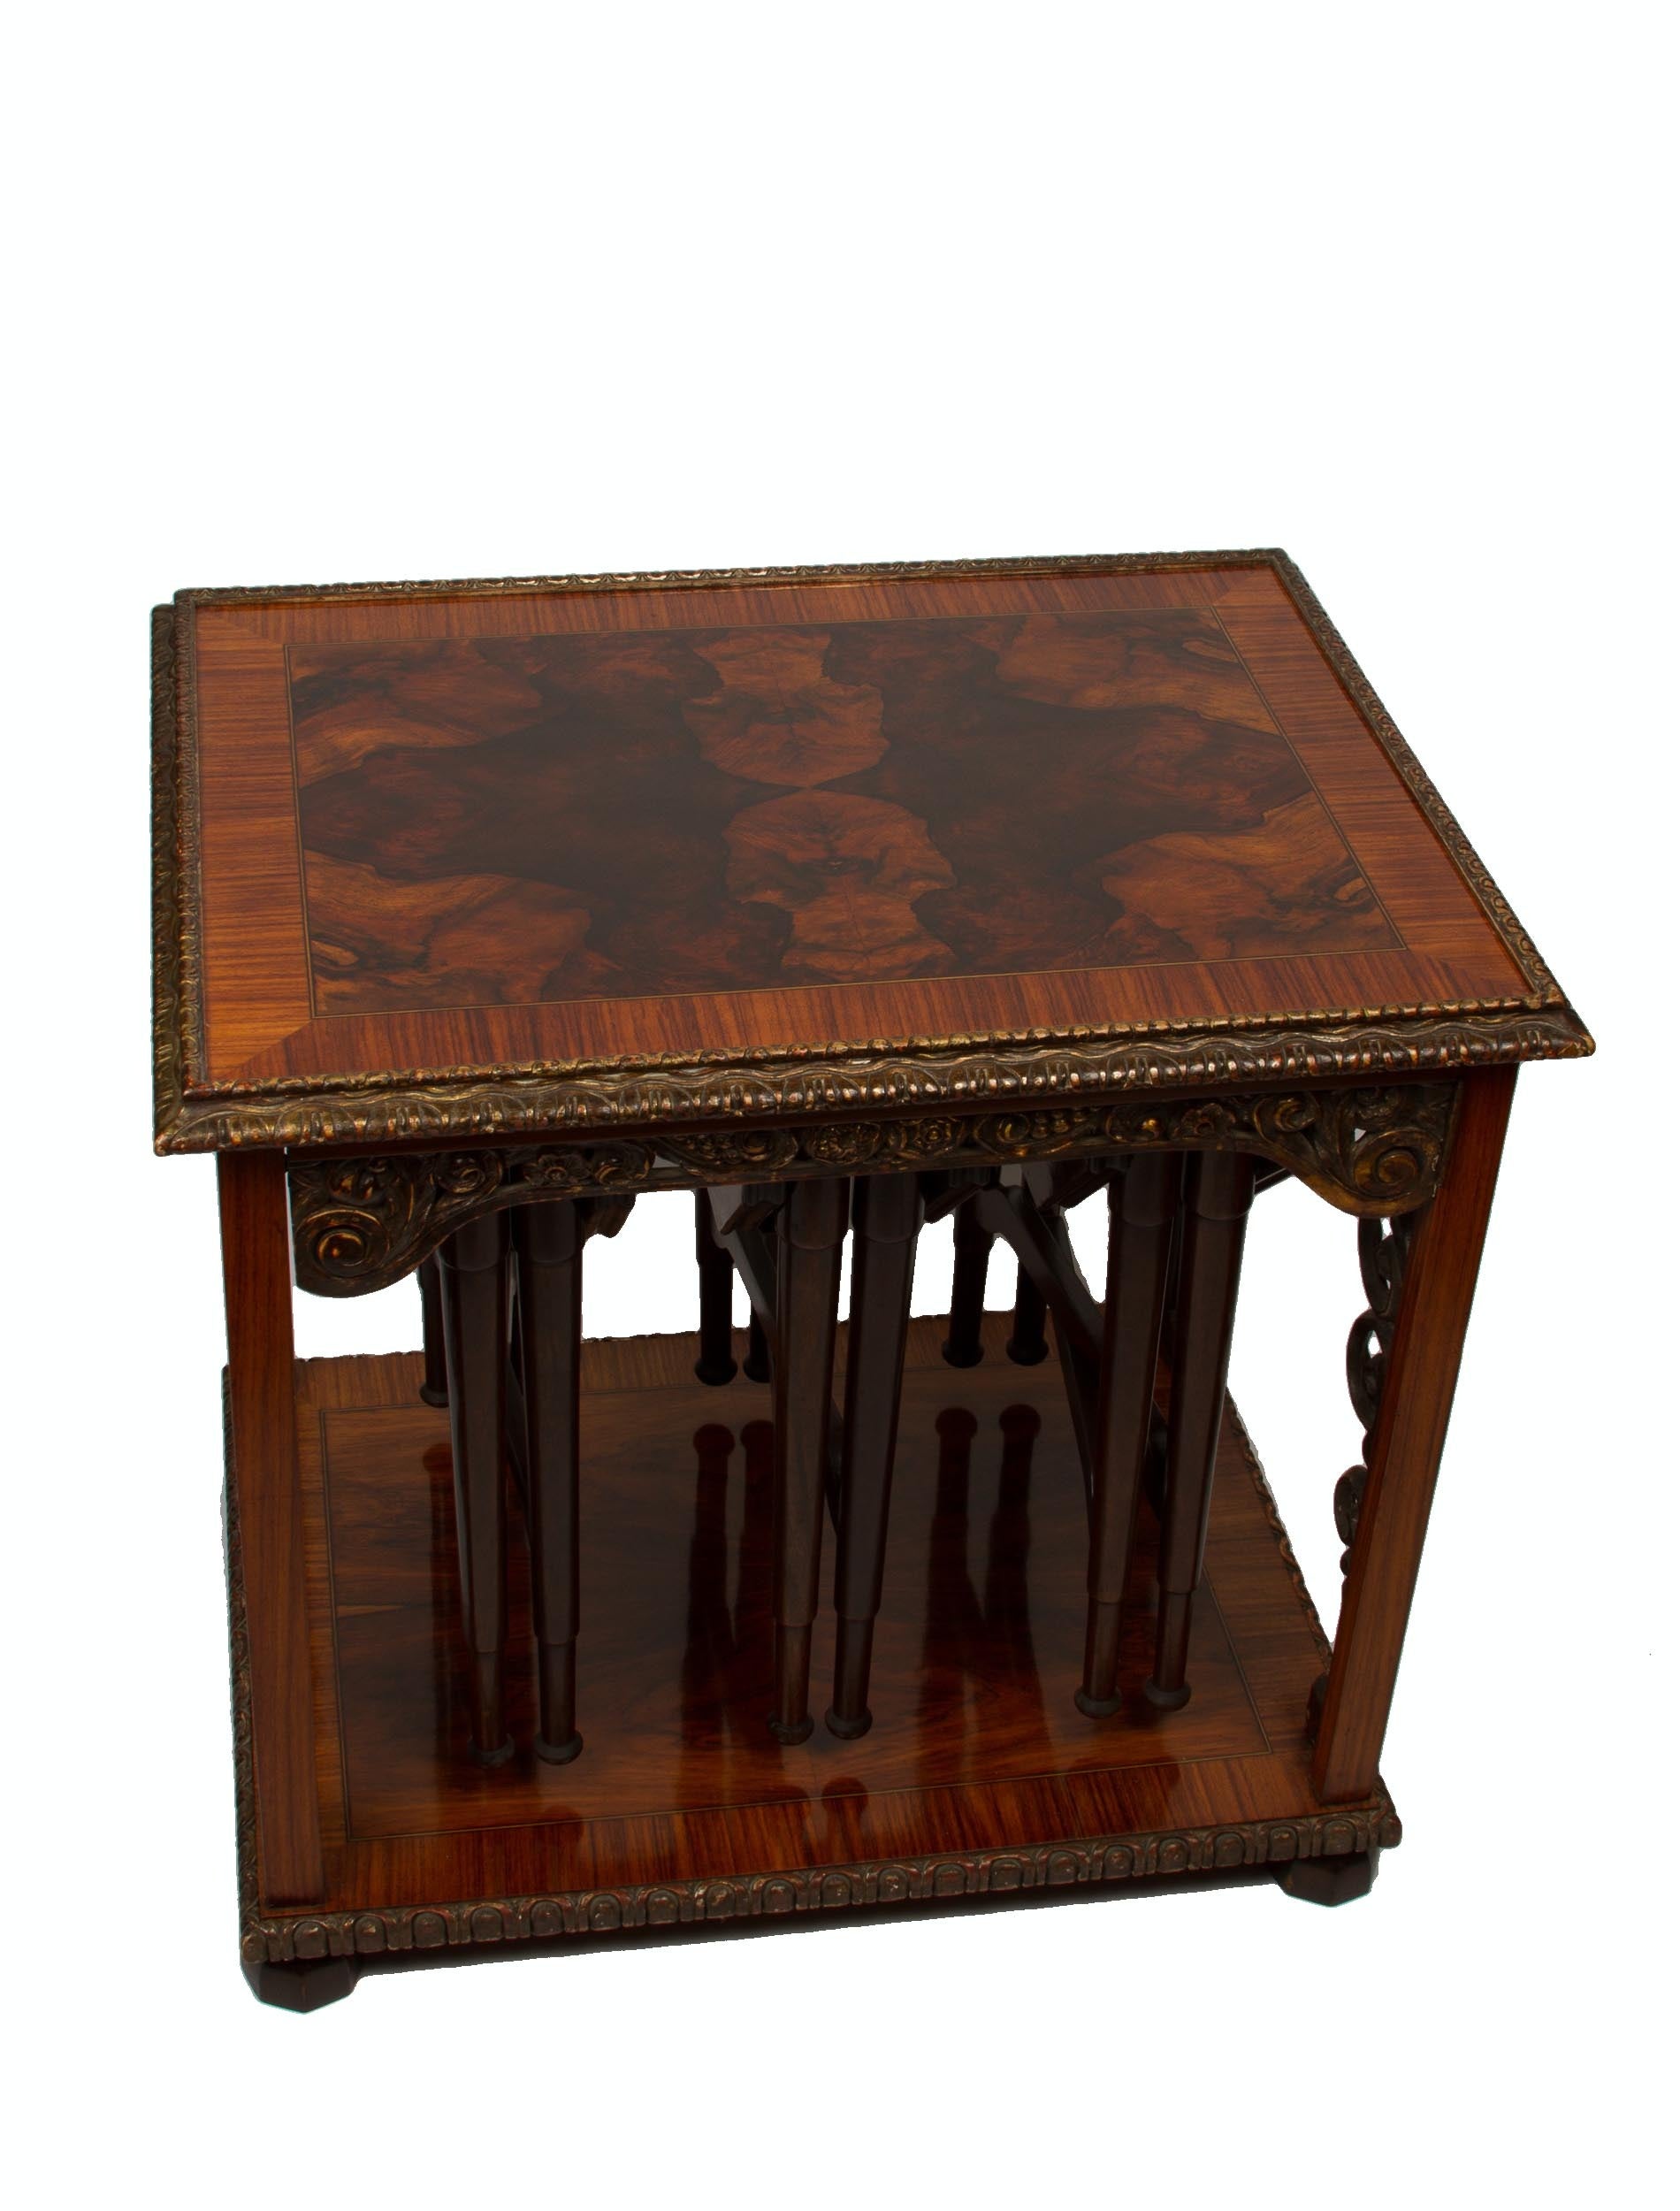 A Dutch Marquetry Inlaid Baroque Style Rectangular Nesting Table